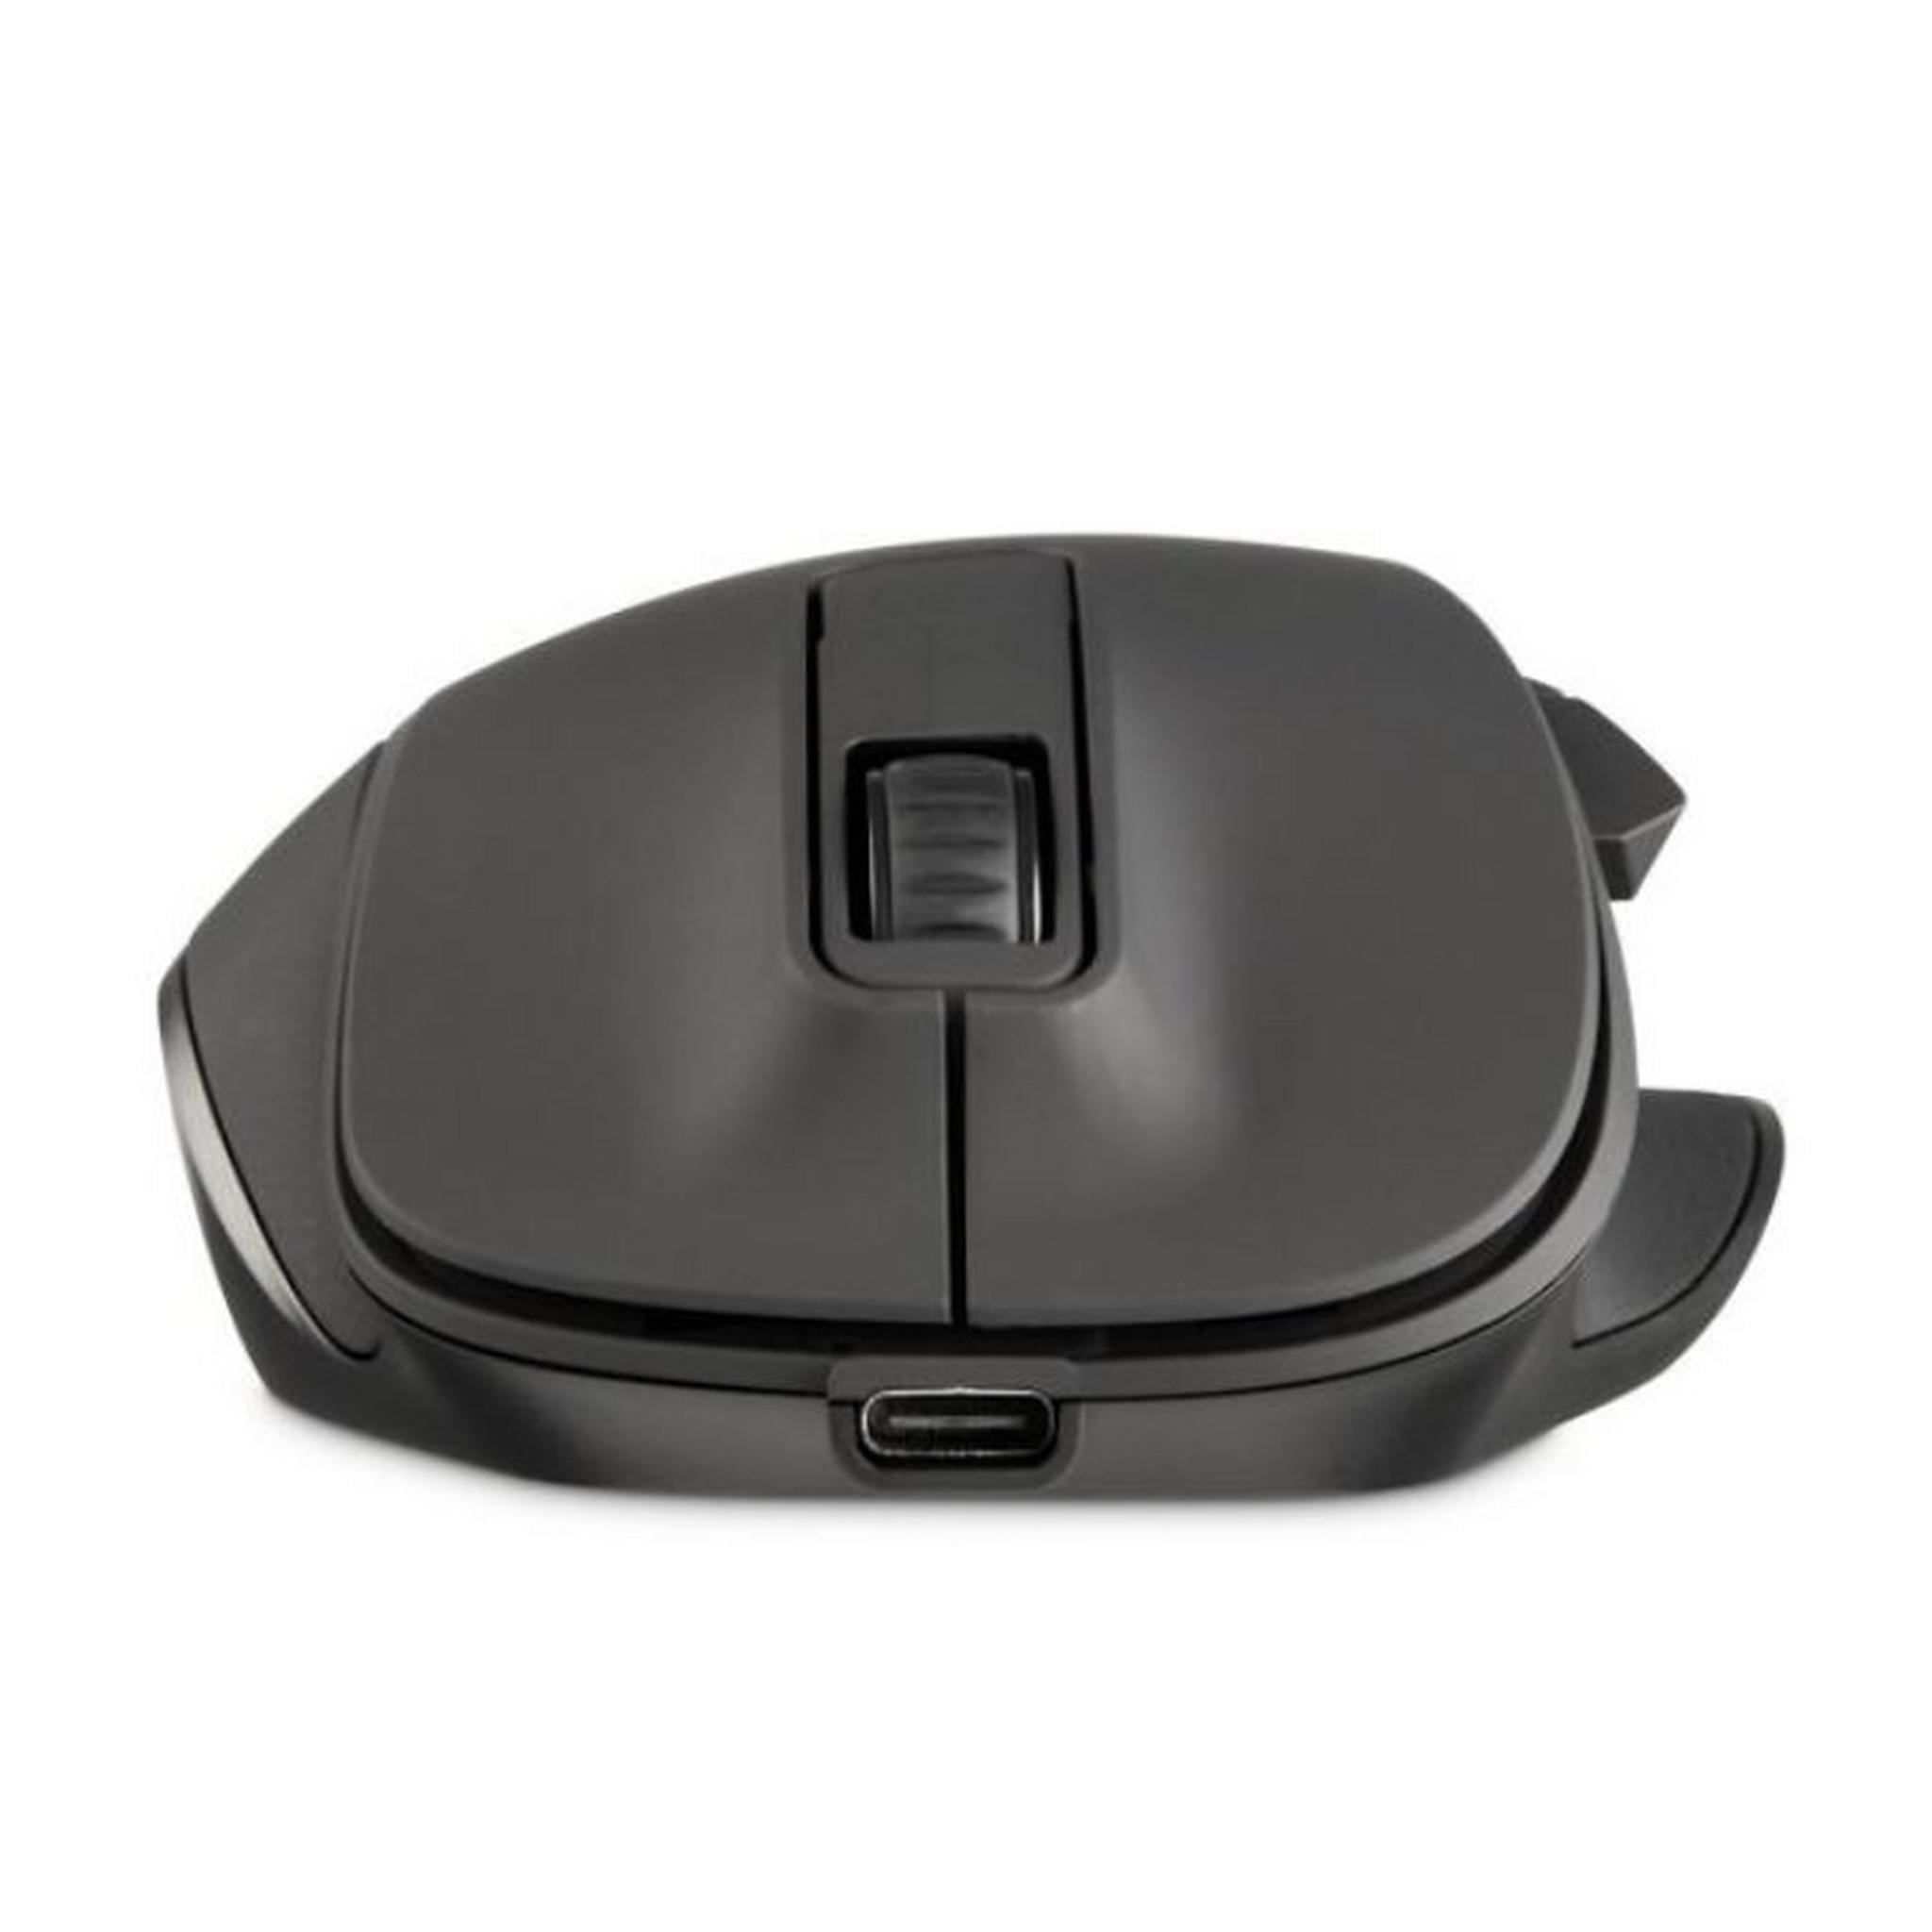 Hama MW-500 Recharge Optical 6-Button Wireless Mouse, 173032 – Black